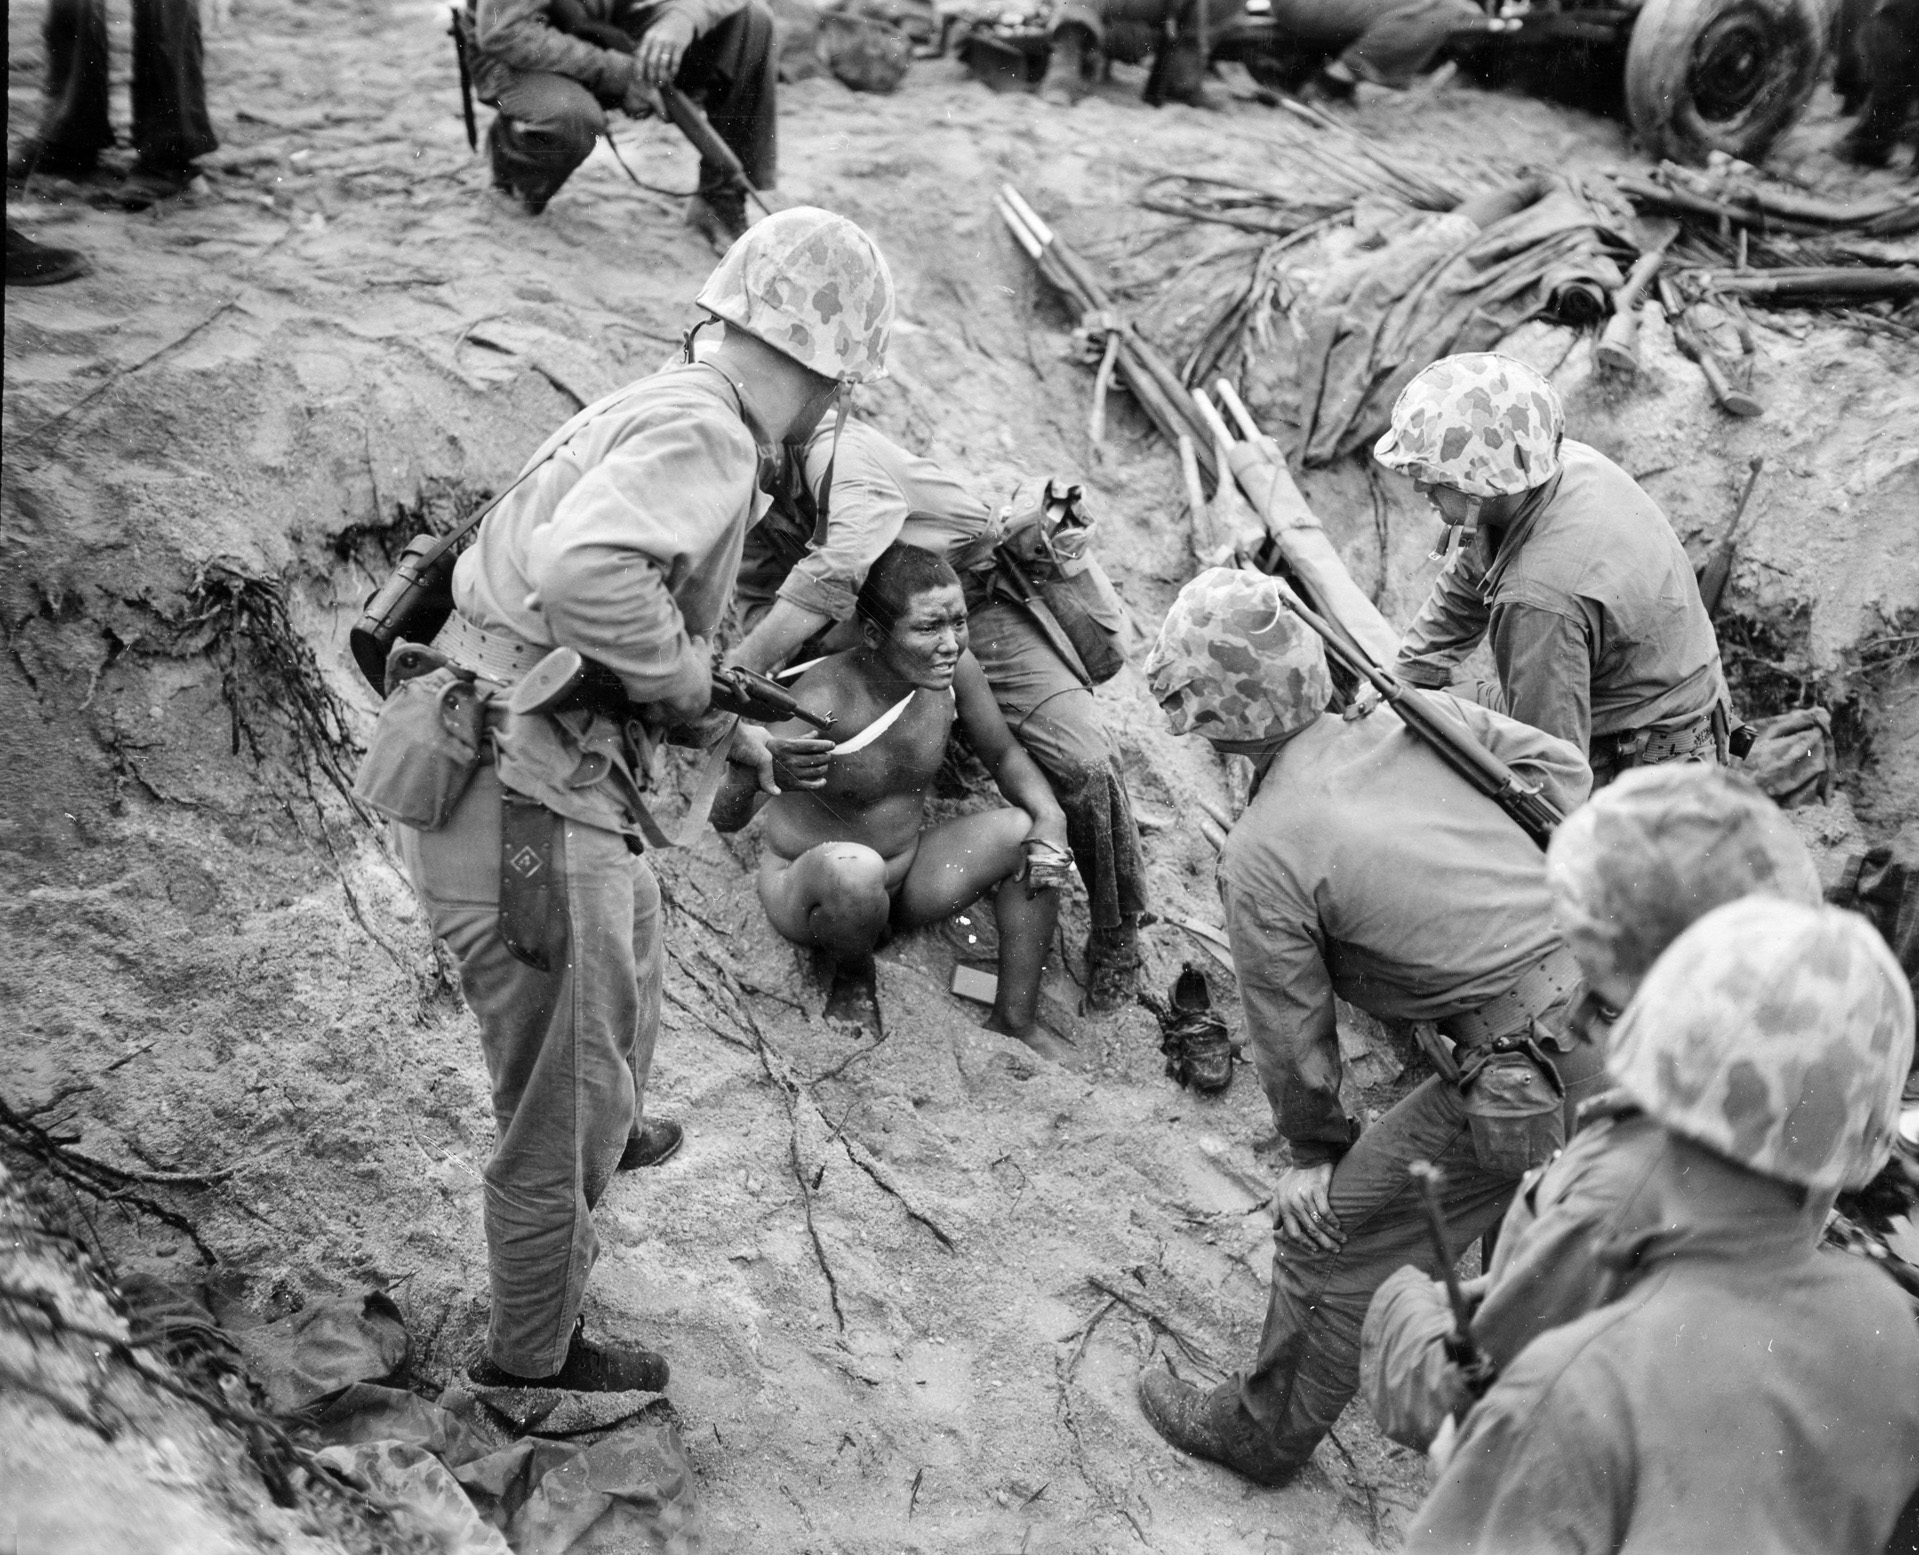 A Marine corpsman gives medical aid to a wounded Japanese soldier at Roi-Namur. By early 1944, the American juggernaut across the Central Pacific was beginning to gain momentum.